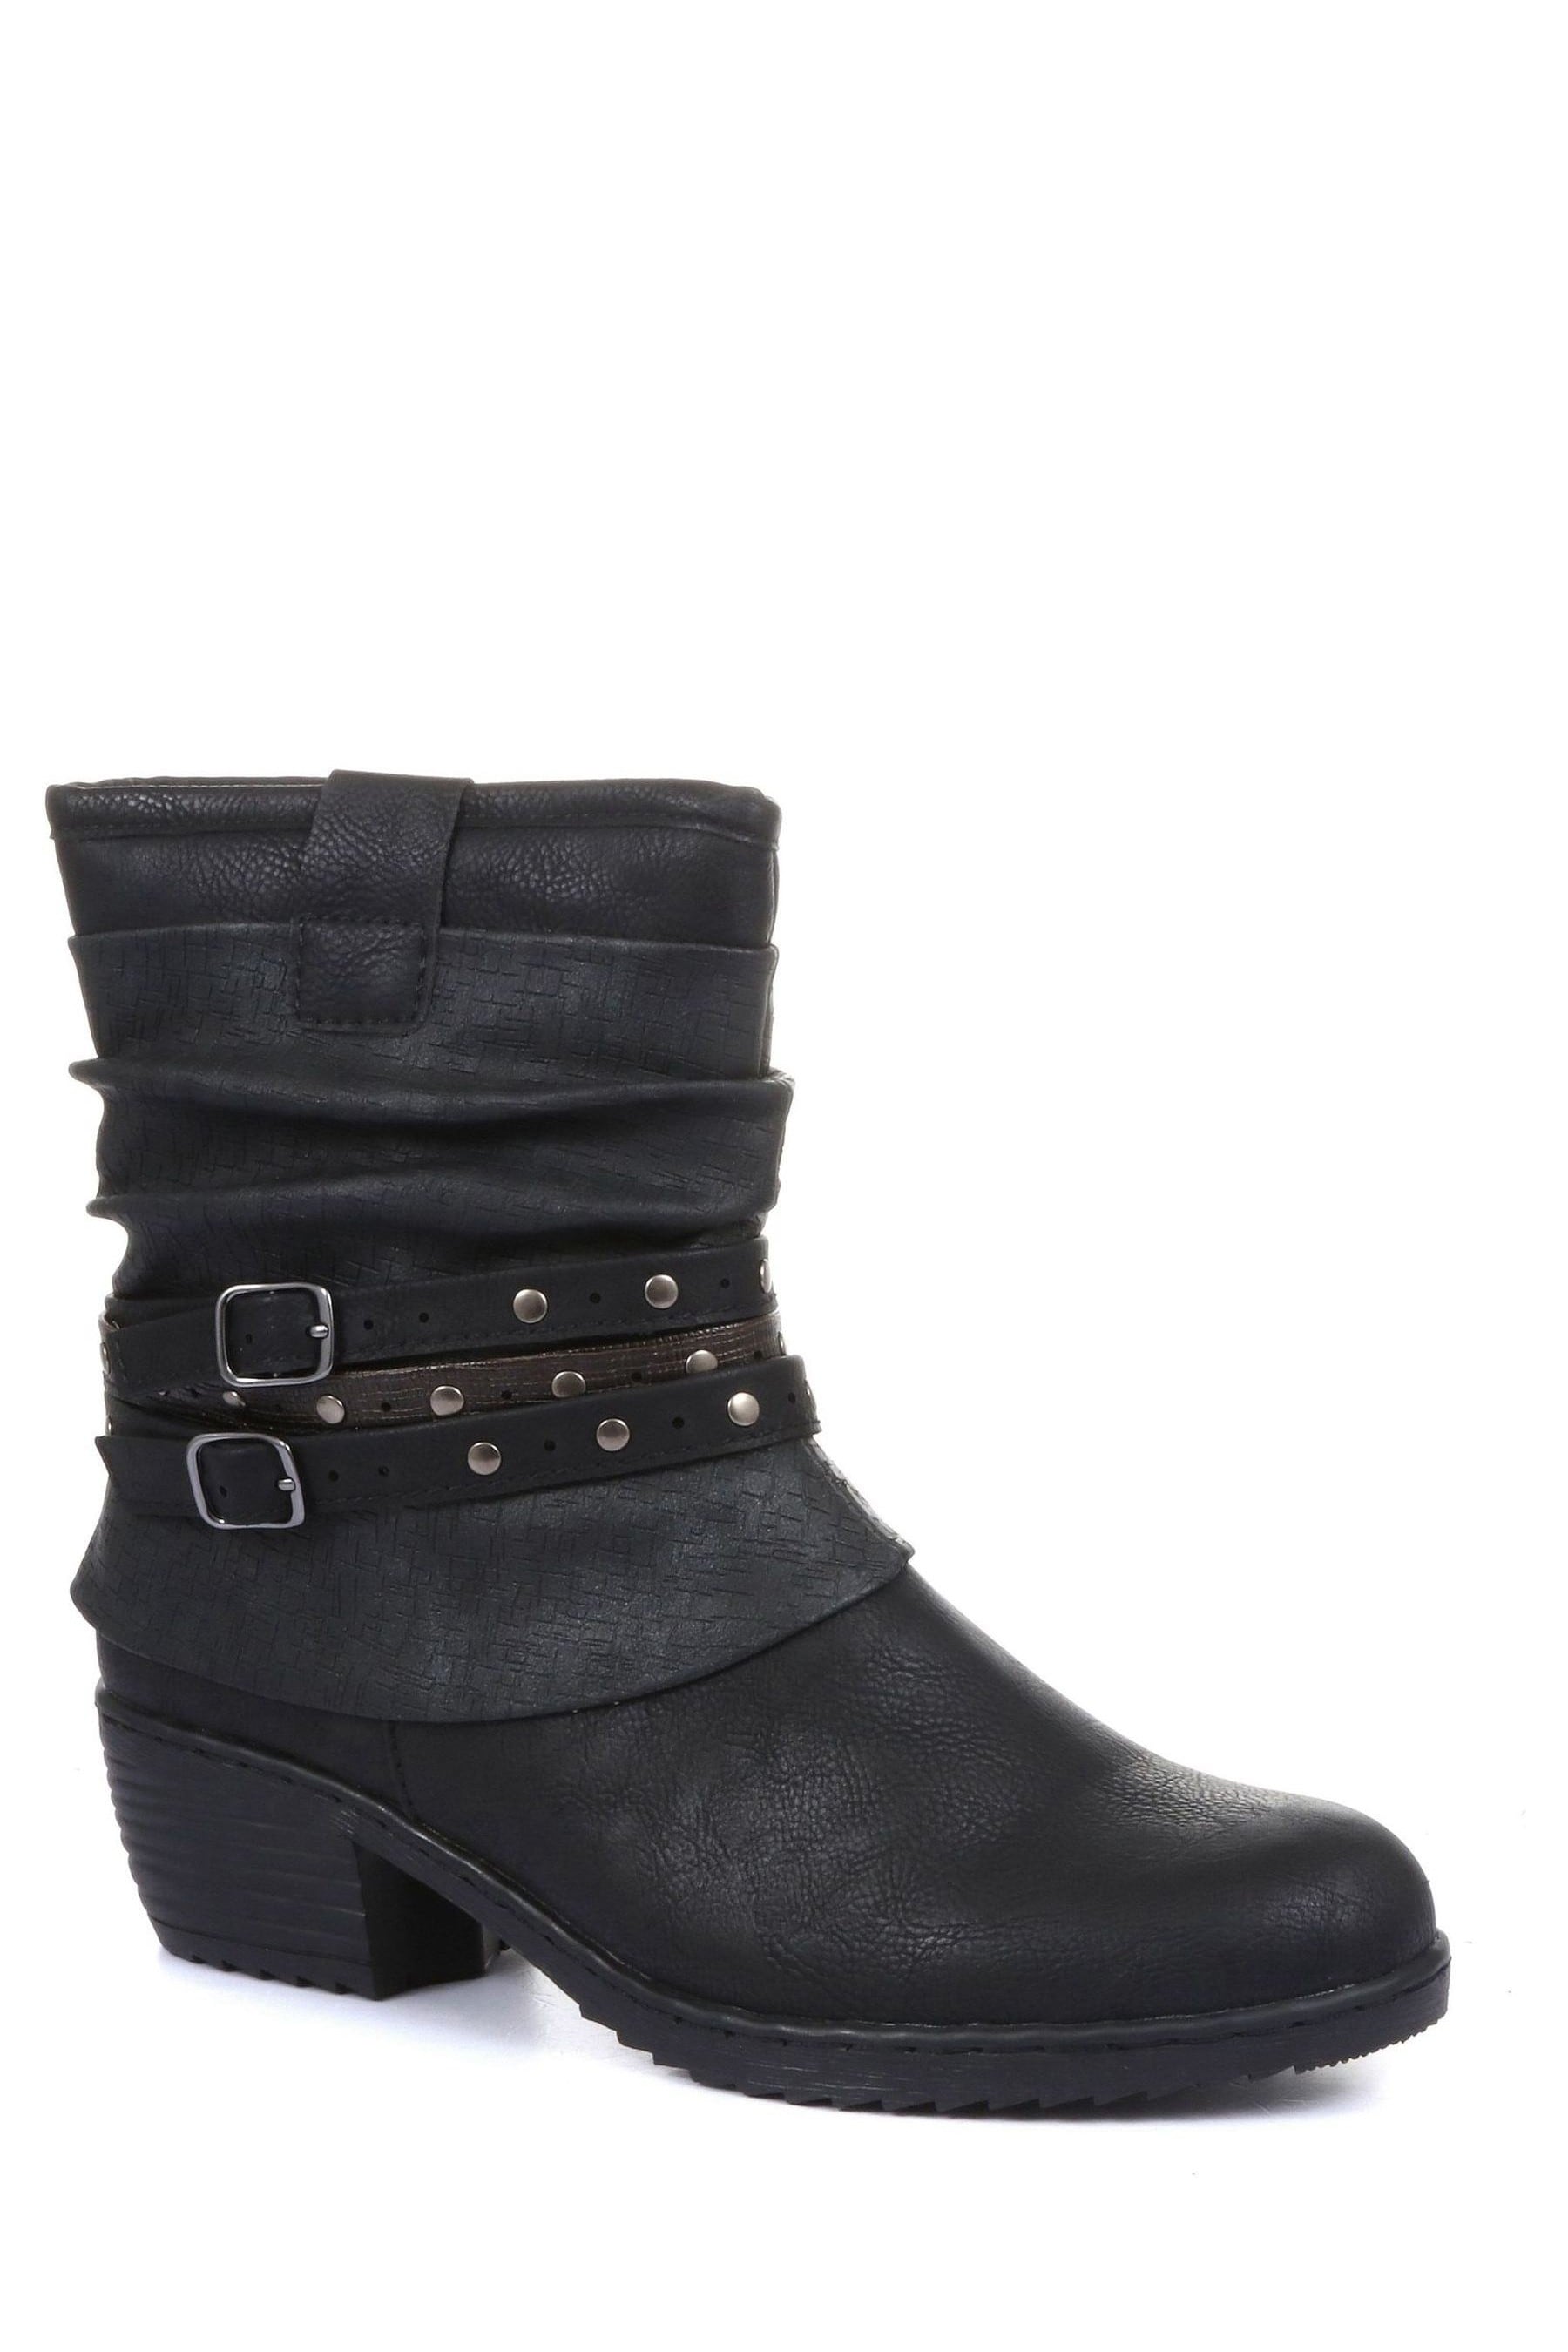 Buy Pavers Black Ladies Slouch Fit Ankle Boots from the Next UK online shop